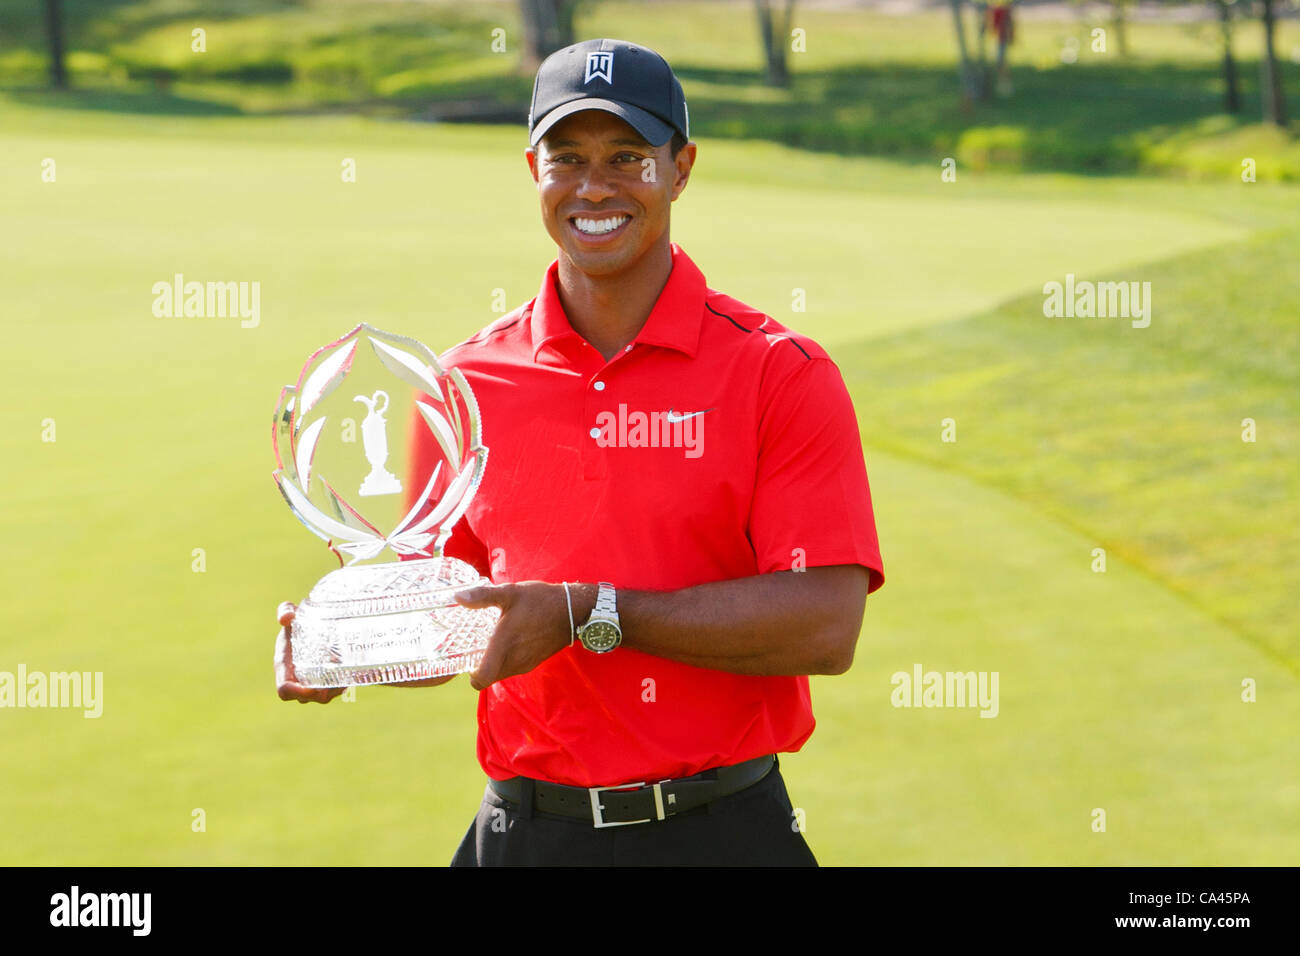 June 03, 2012: Tiger Woods poses for photographs holding the Memorial ...